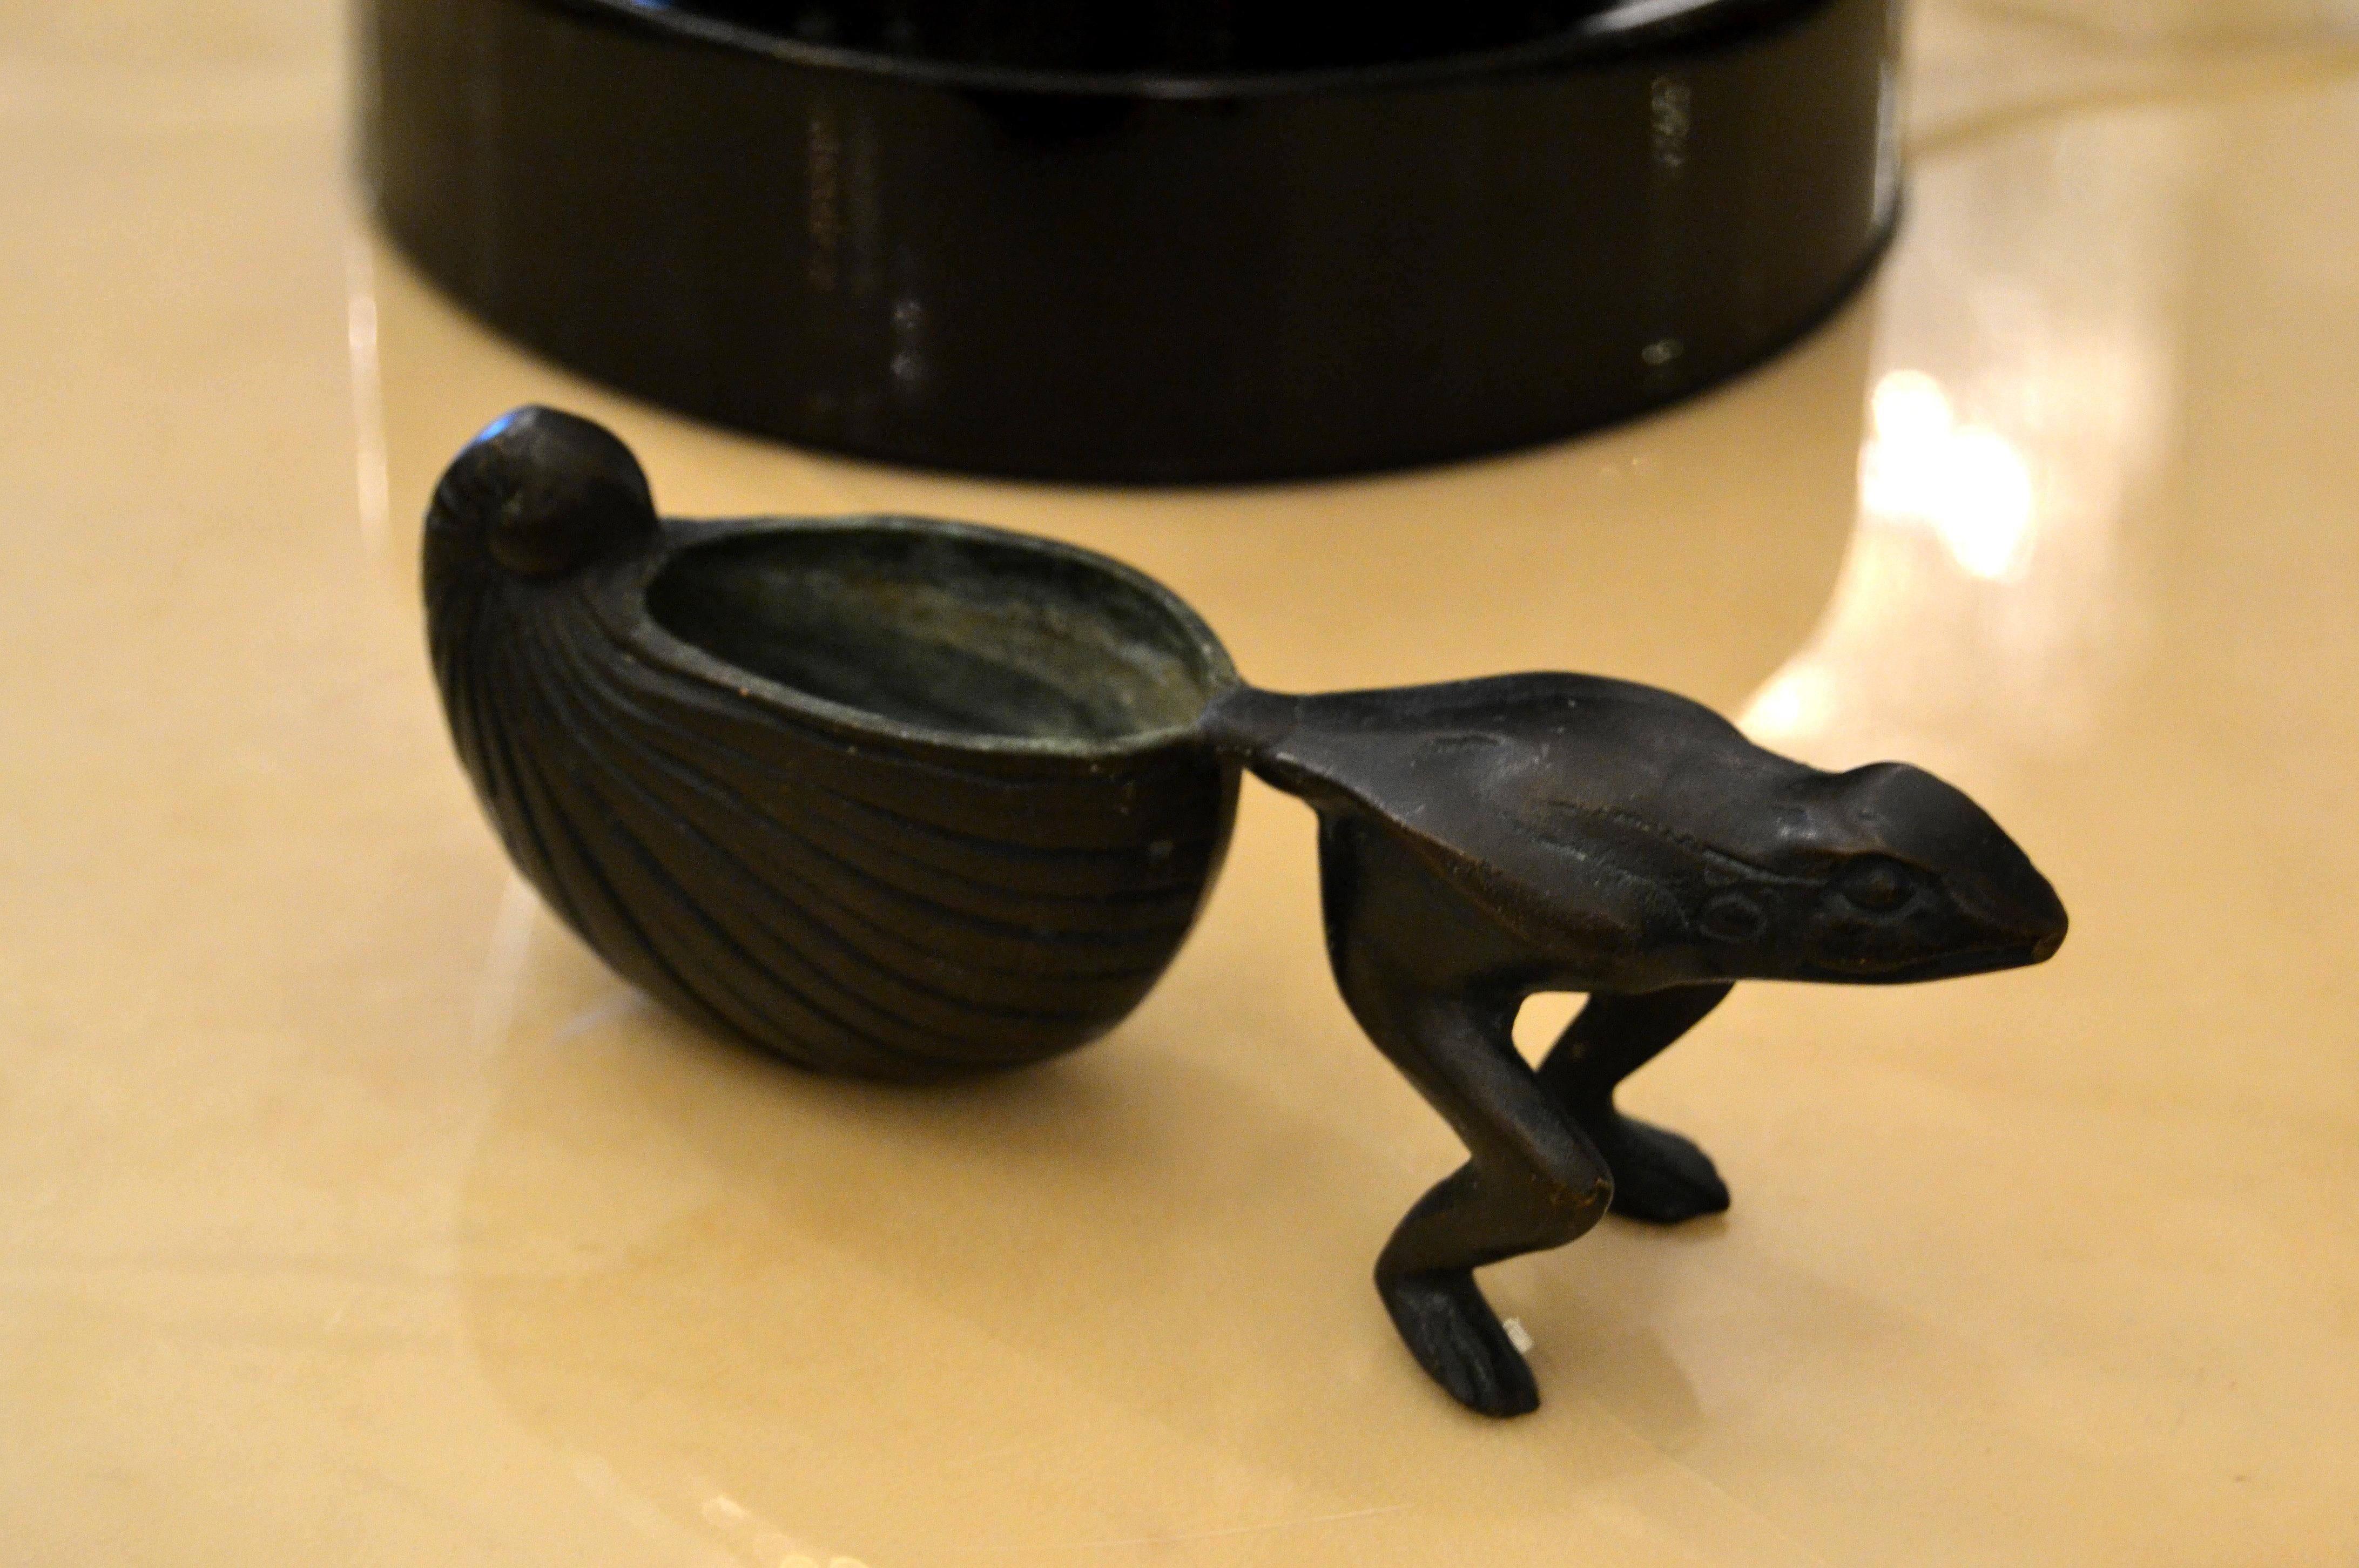 Mid-Century Modern Asian inspired bronze frog, animal sculpture pulling an upturned shell that serves as a bowl or a miniature flowerpot planter.
  